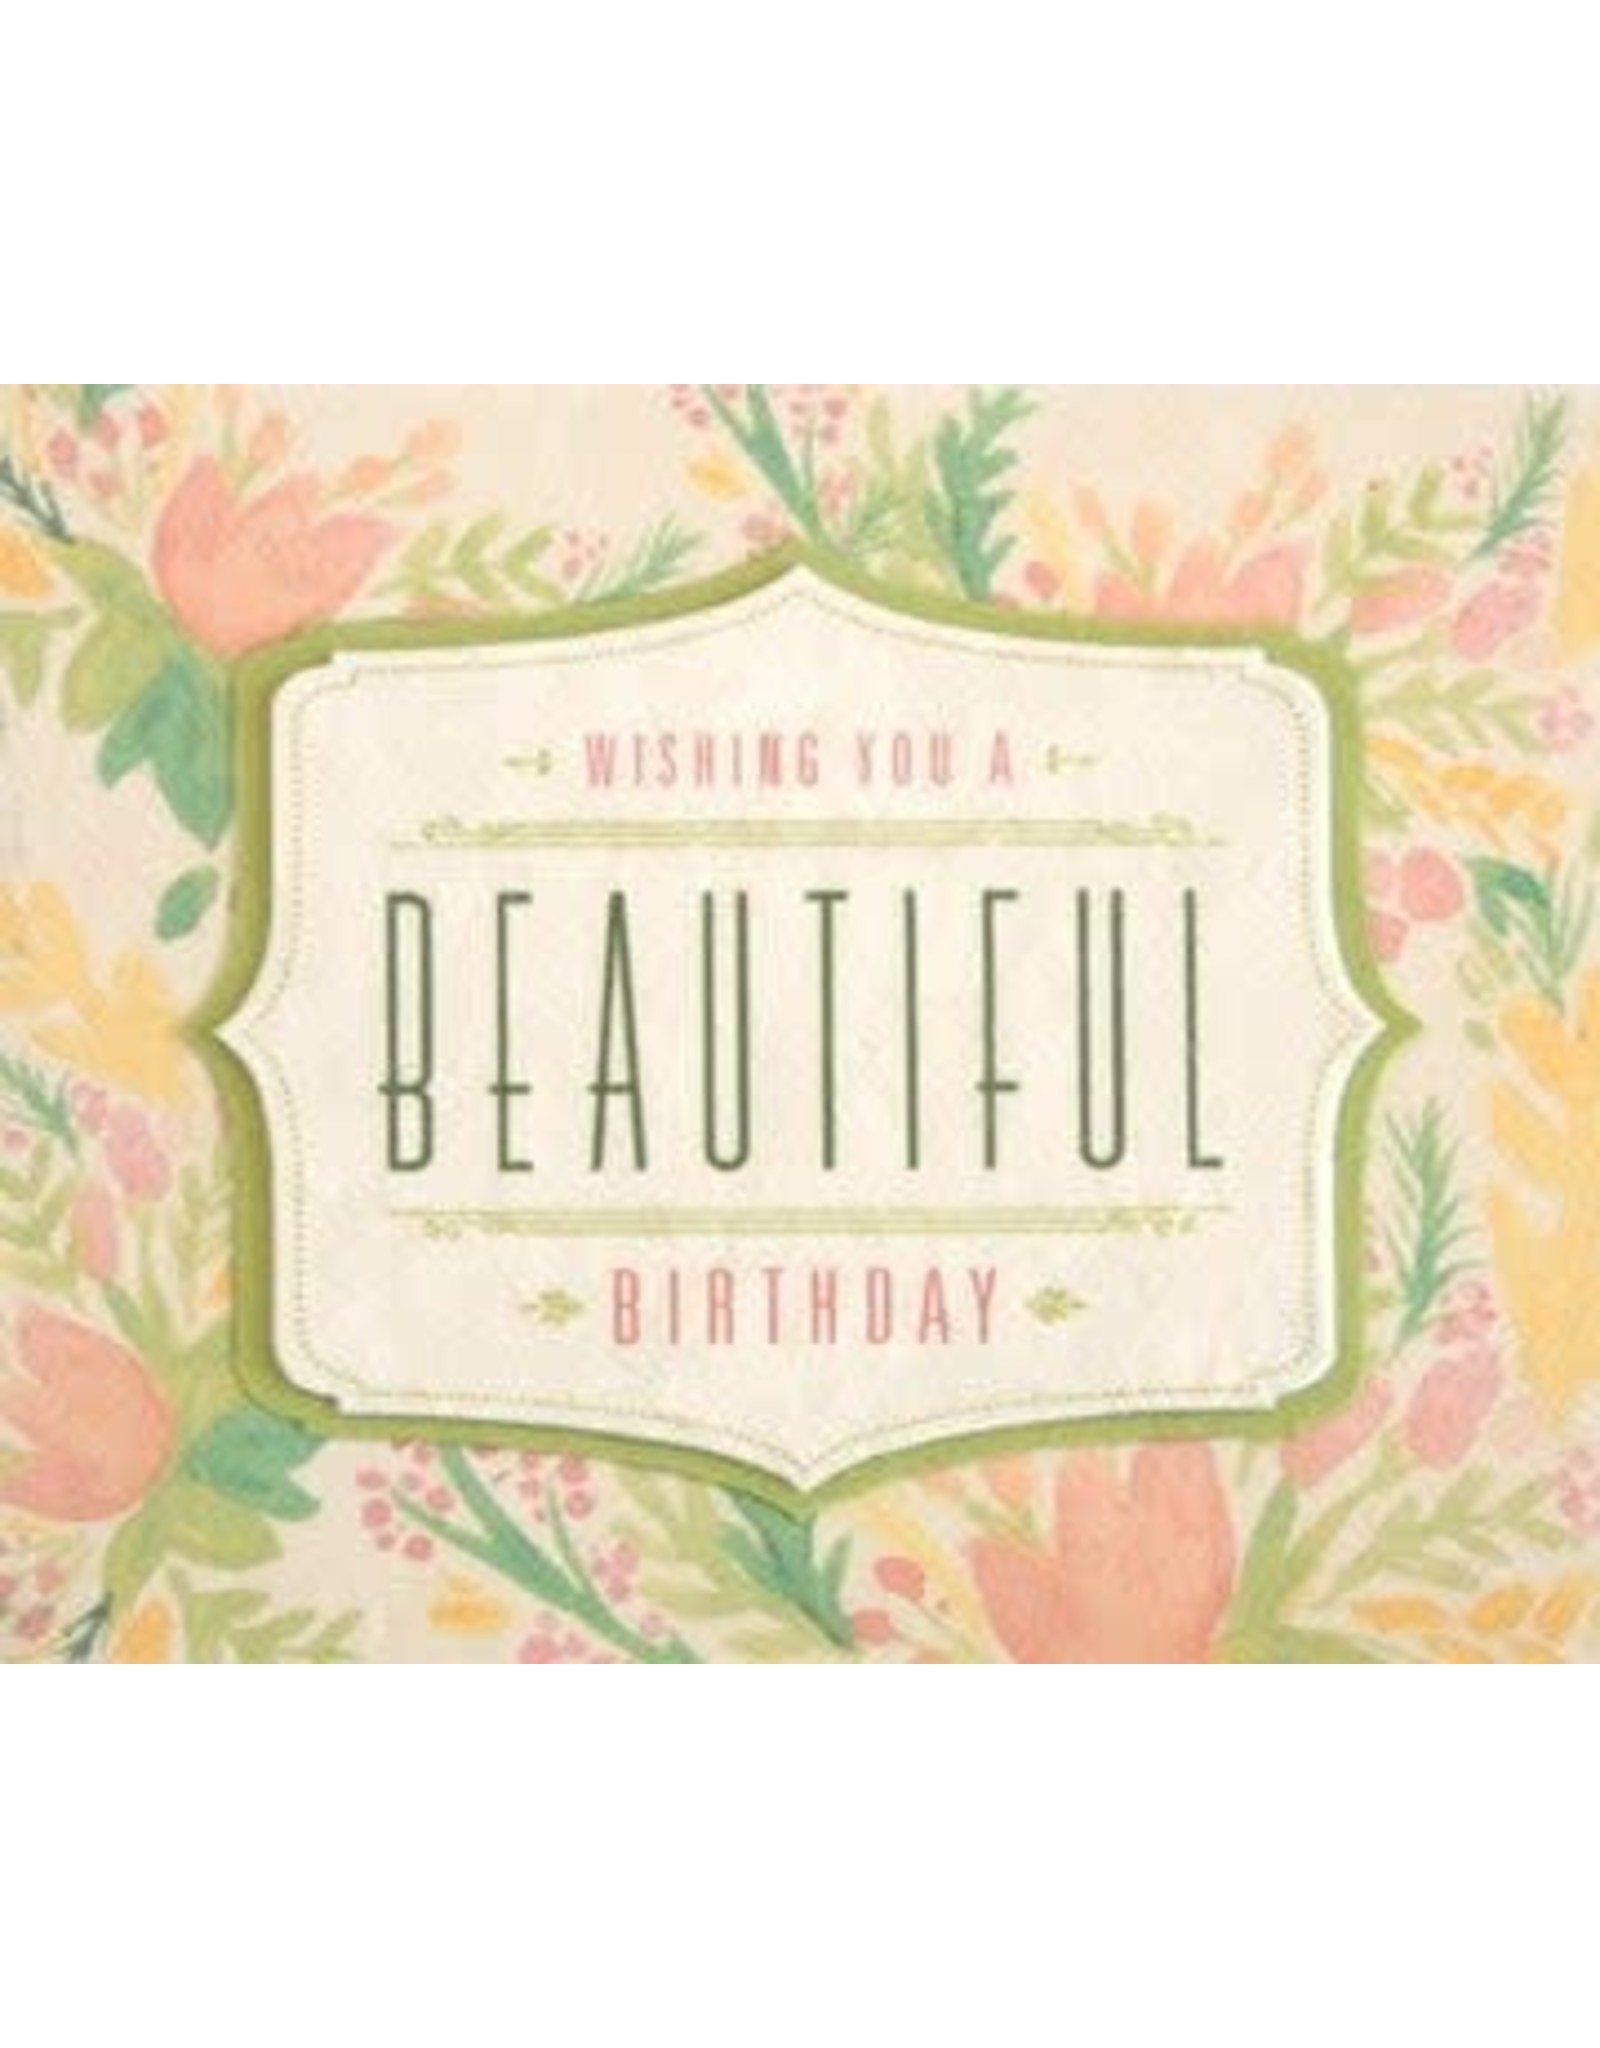 Philippines Watercolour Birthday Greeting Card, Philippines